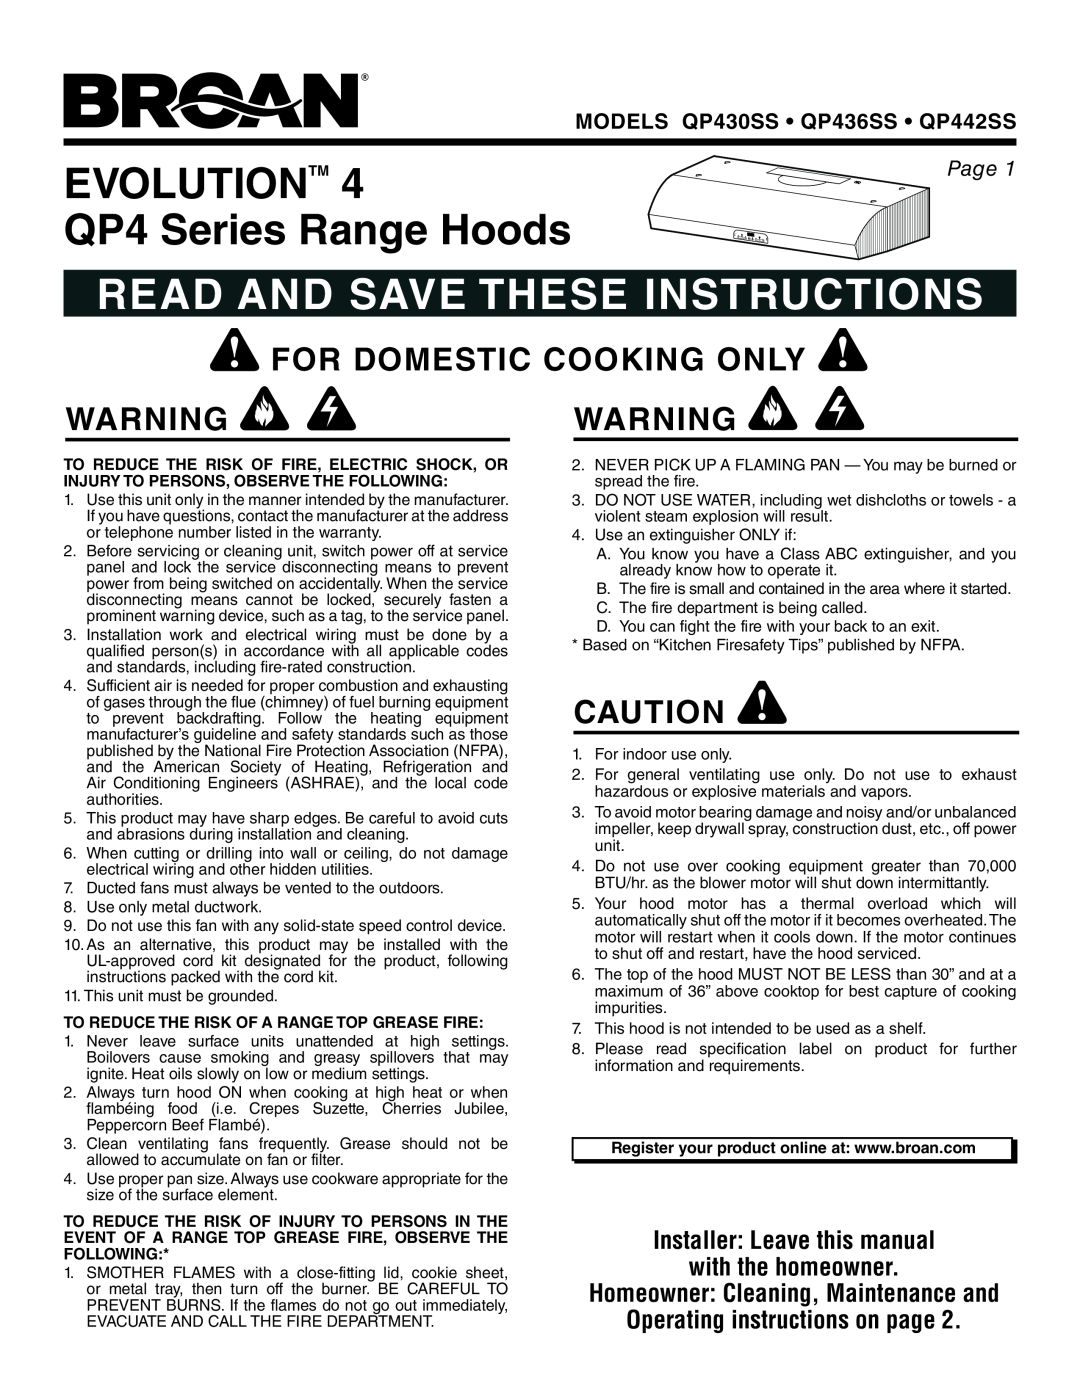 Broan QP436SS, QP430SS, QP442SS warranty Evolutiontm, QP4 Series Range Hoods, Read And Save These Instructions, Page 